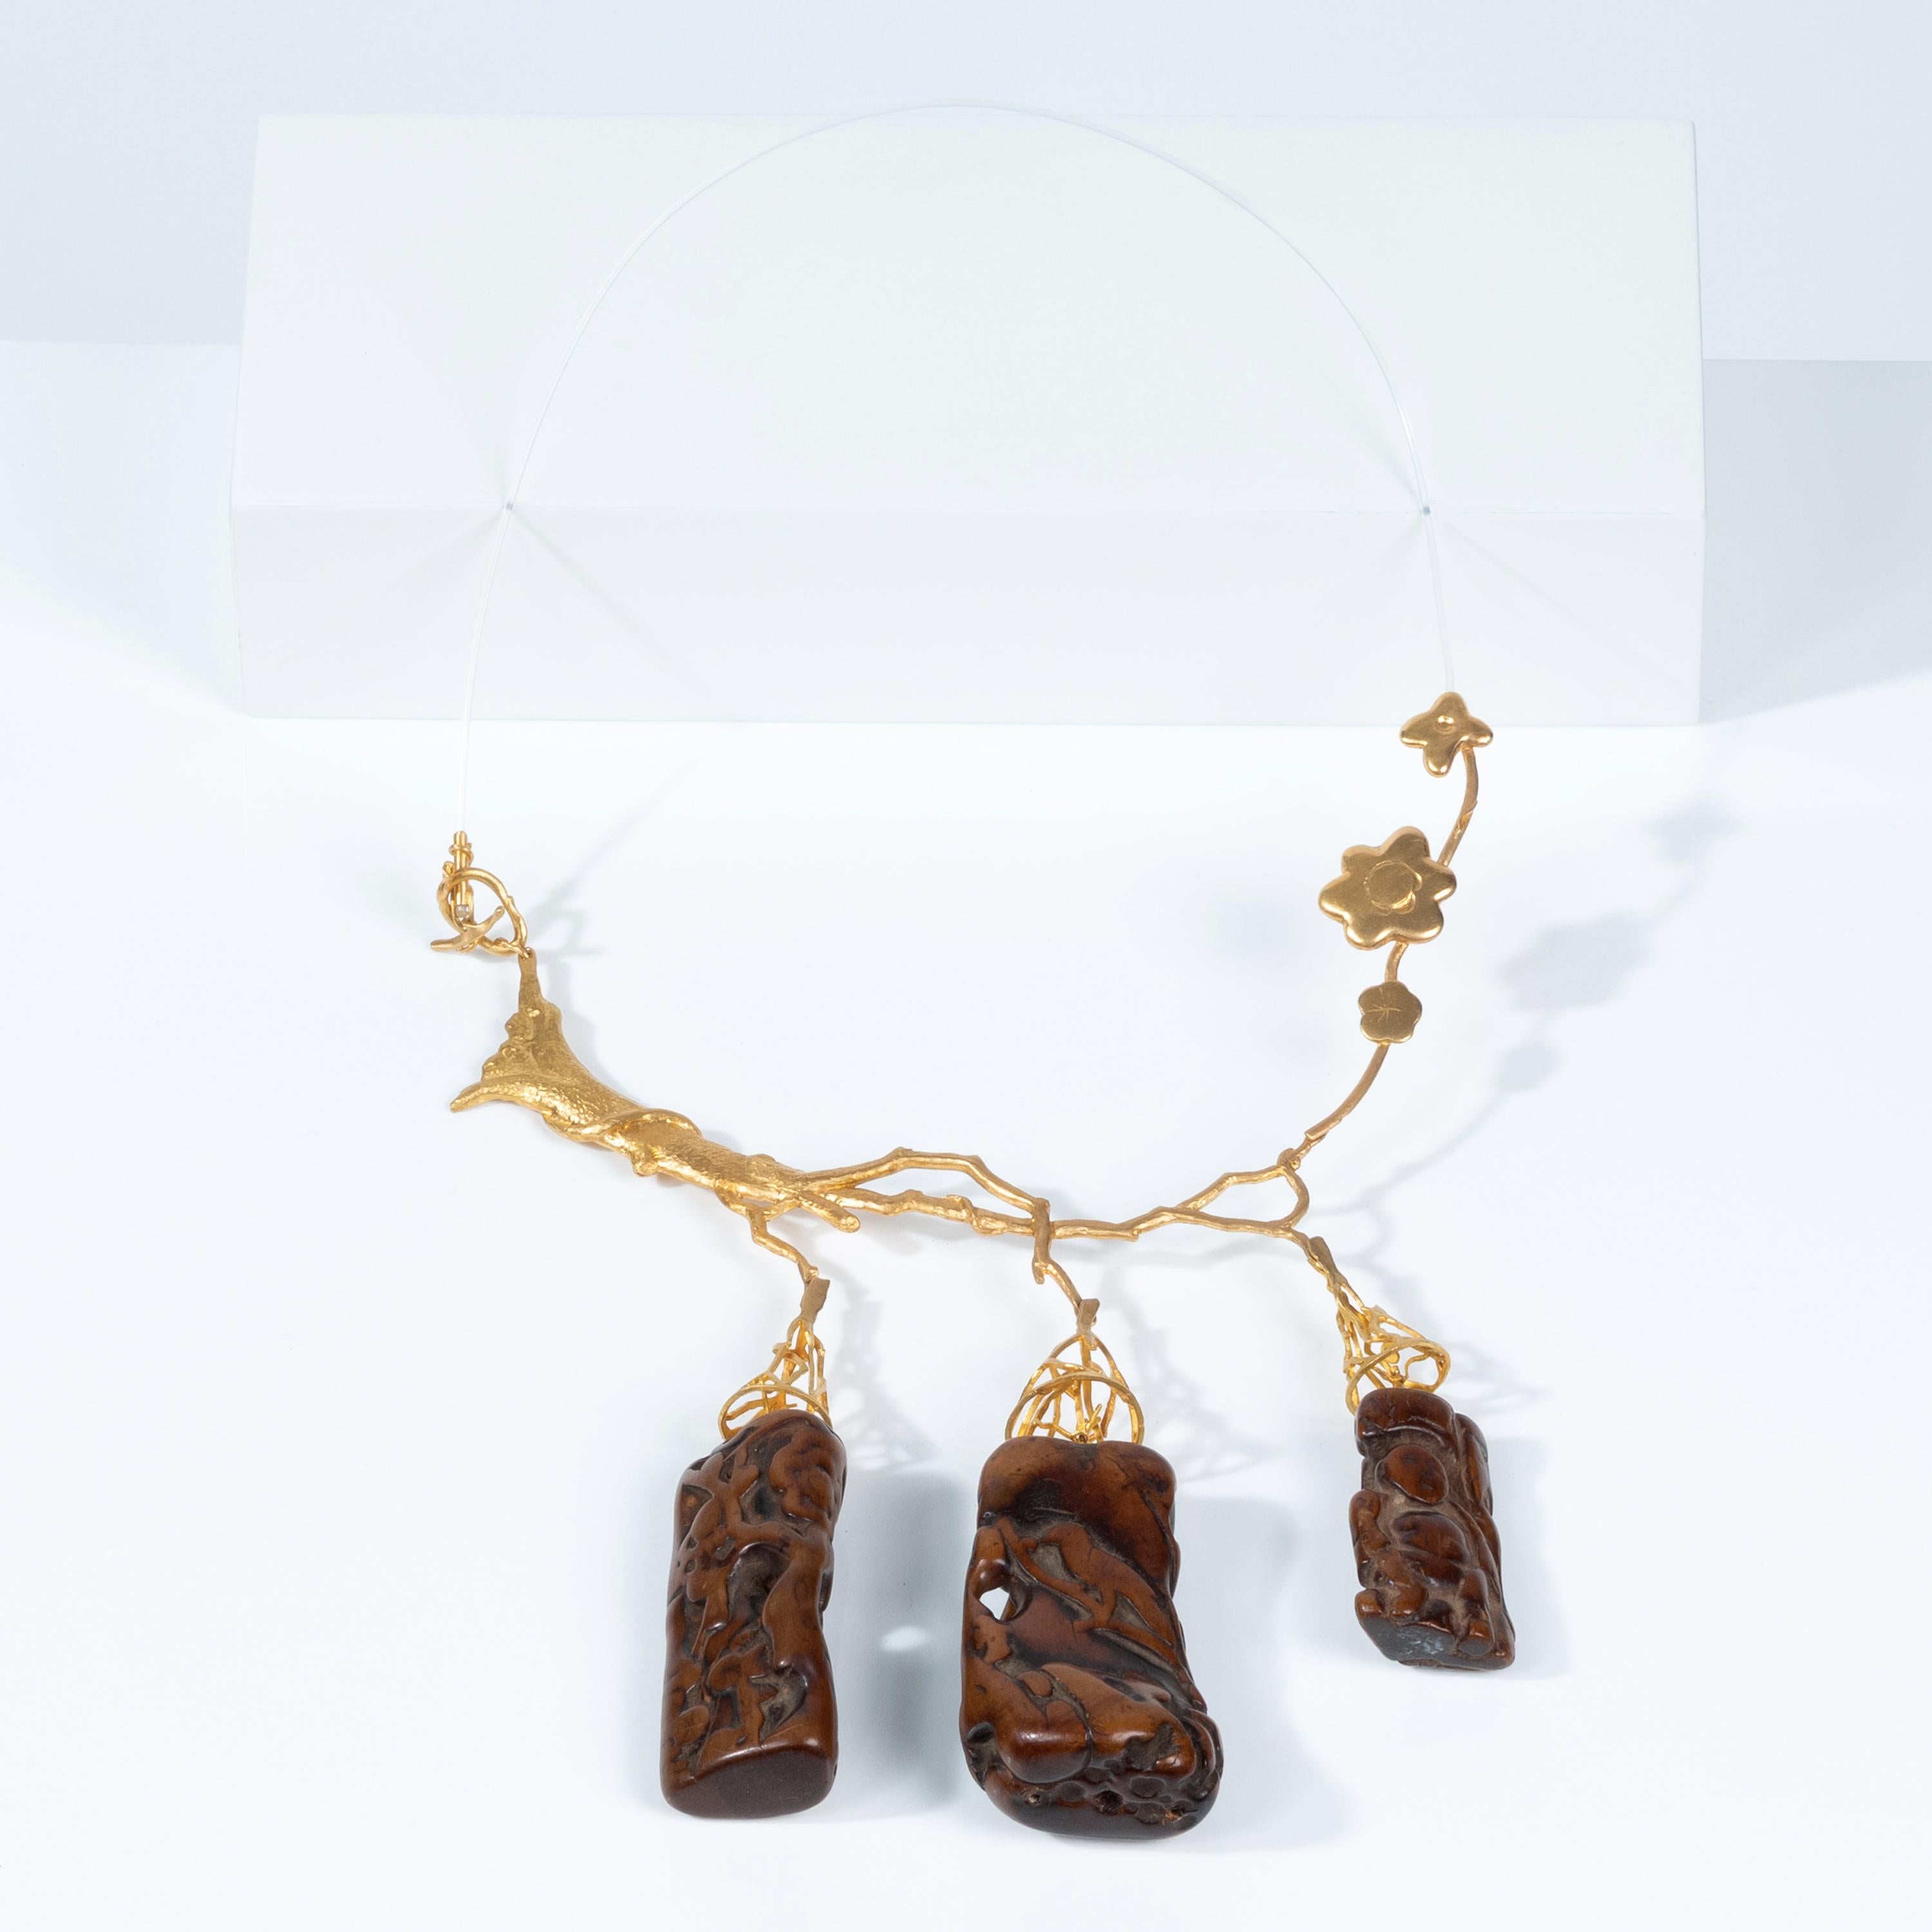 Artist and architect Daniel Azaro was asked by Mimi Lipton to craft this one-of-a-kind necklace. From a delicate 22 karat gold ribbon, hang three pendants of beautifully carved wood from China. 

With diverses subjects, symbolisms, styles and